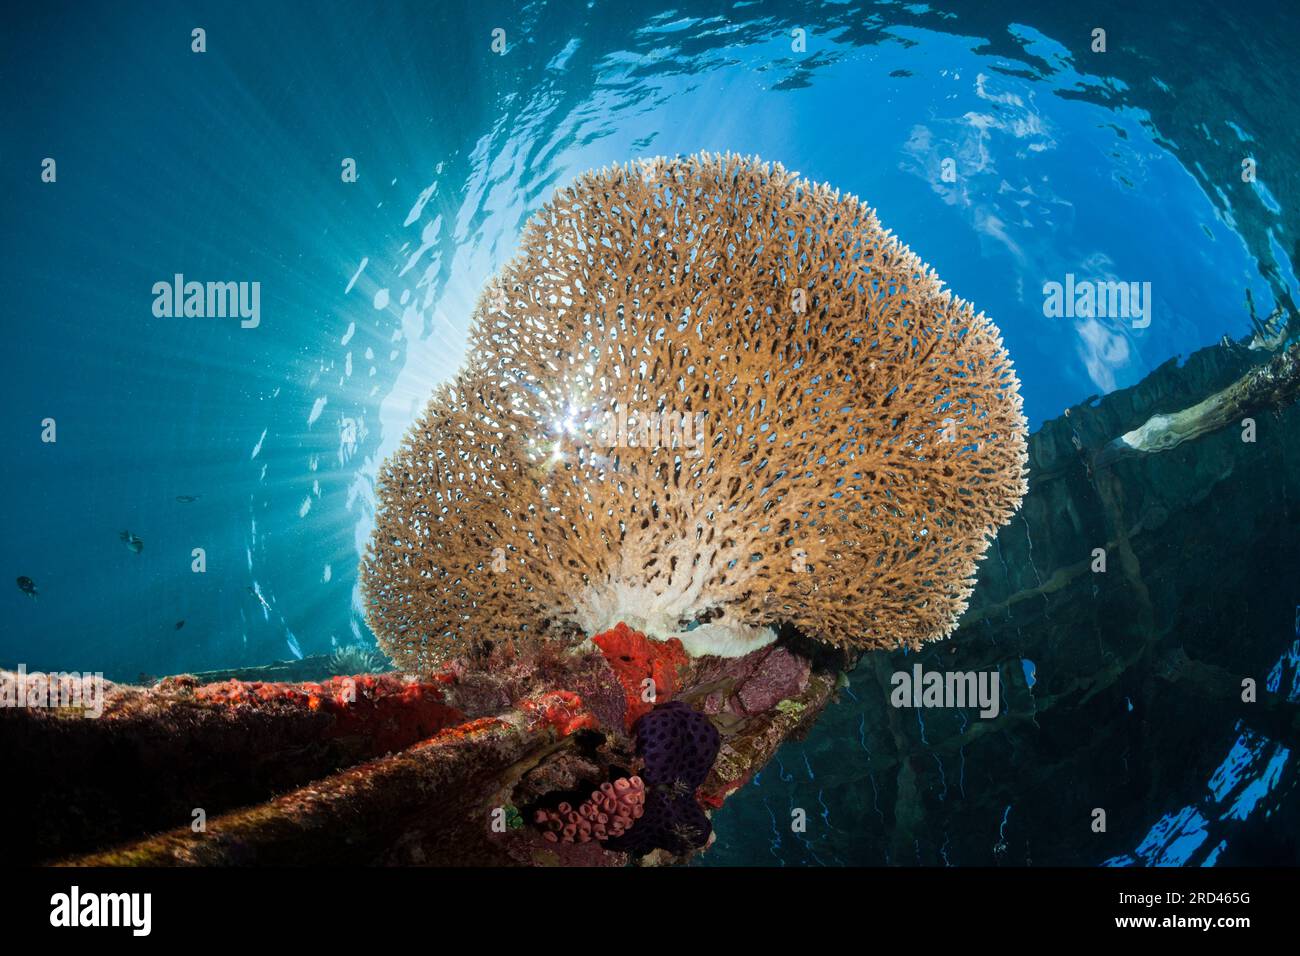 Table coral growing on Jetty, Acropora sp., Raja Ampat, West Papua, Indonesia Stock Photo